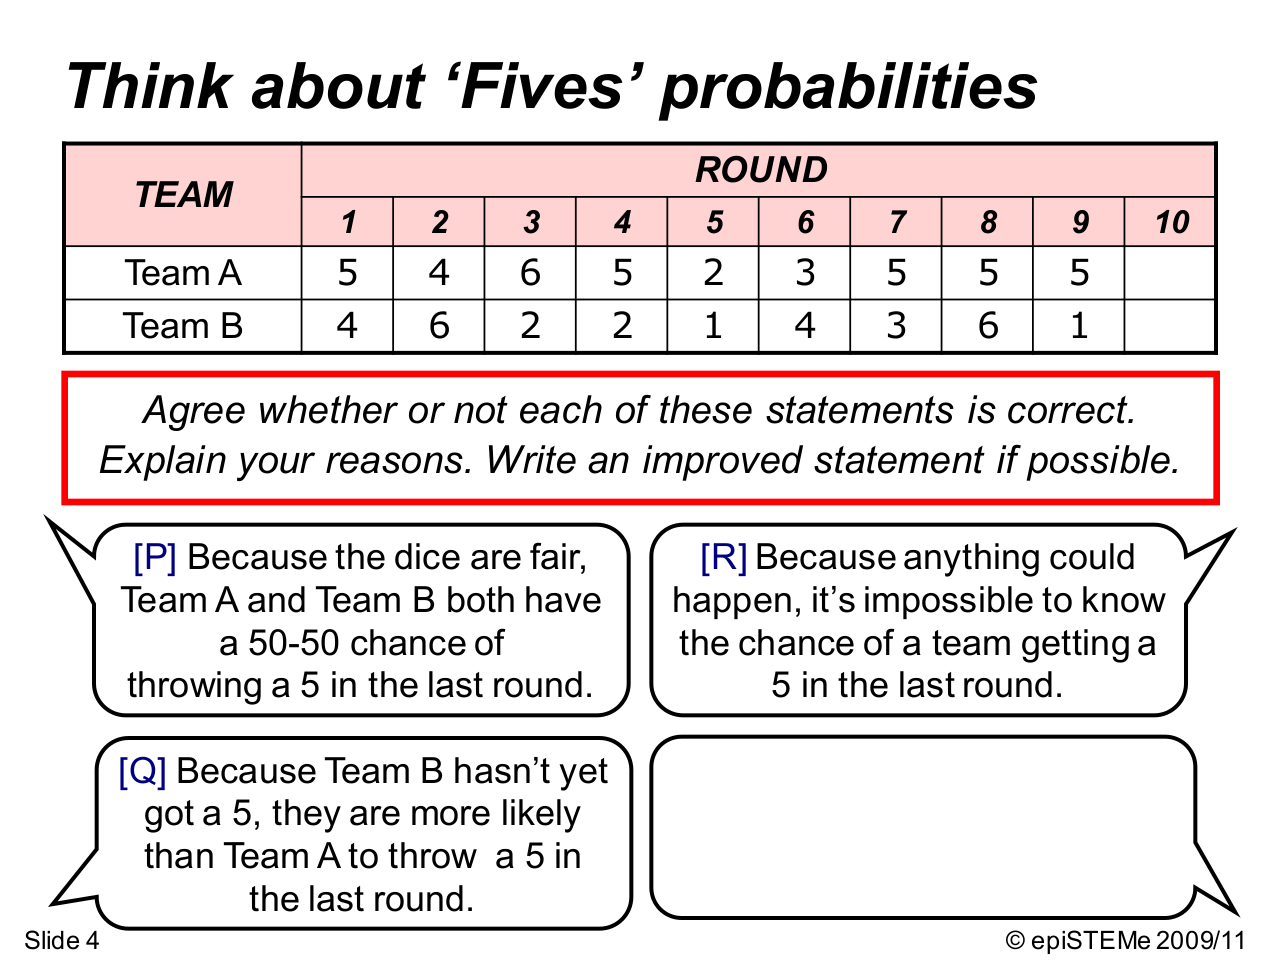 Think about 'Fives' probabilities presentation slide. Students are asked to decide whether or not each of three probability-related statements is correct, and are asked to write an improved statement if possible.